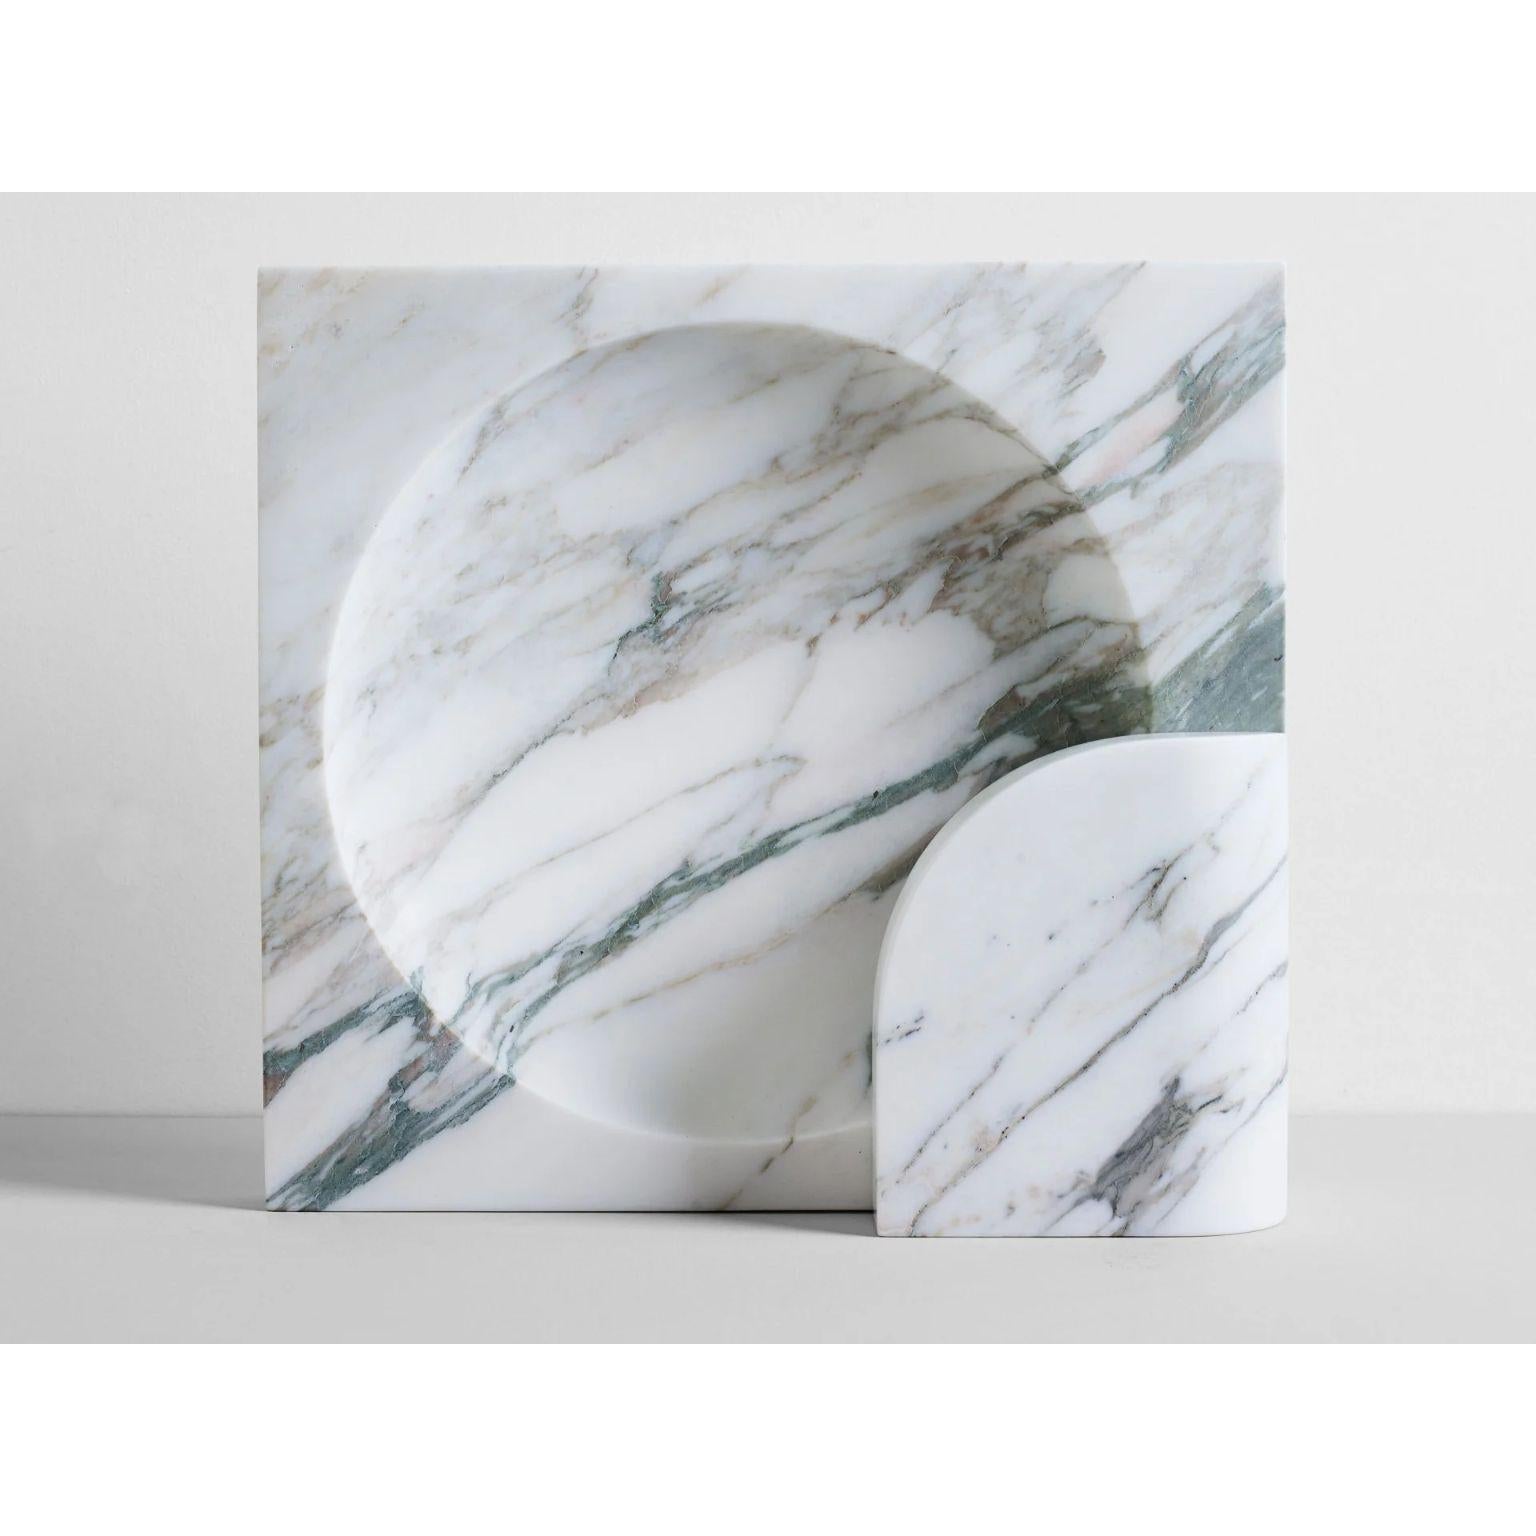 Calacatta Block Sconce by Henry Wilson
Dimensions: W 35 x D 11 x H 35 cm
Materials: Calacatta Marble

The Block Sconce in Calacatta Marble is a two piece stone light with captured bulb. Concealed mounting plate fixes the front and back pieces